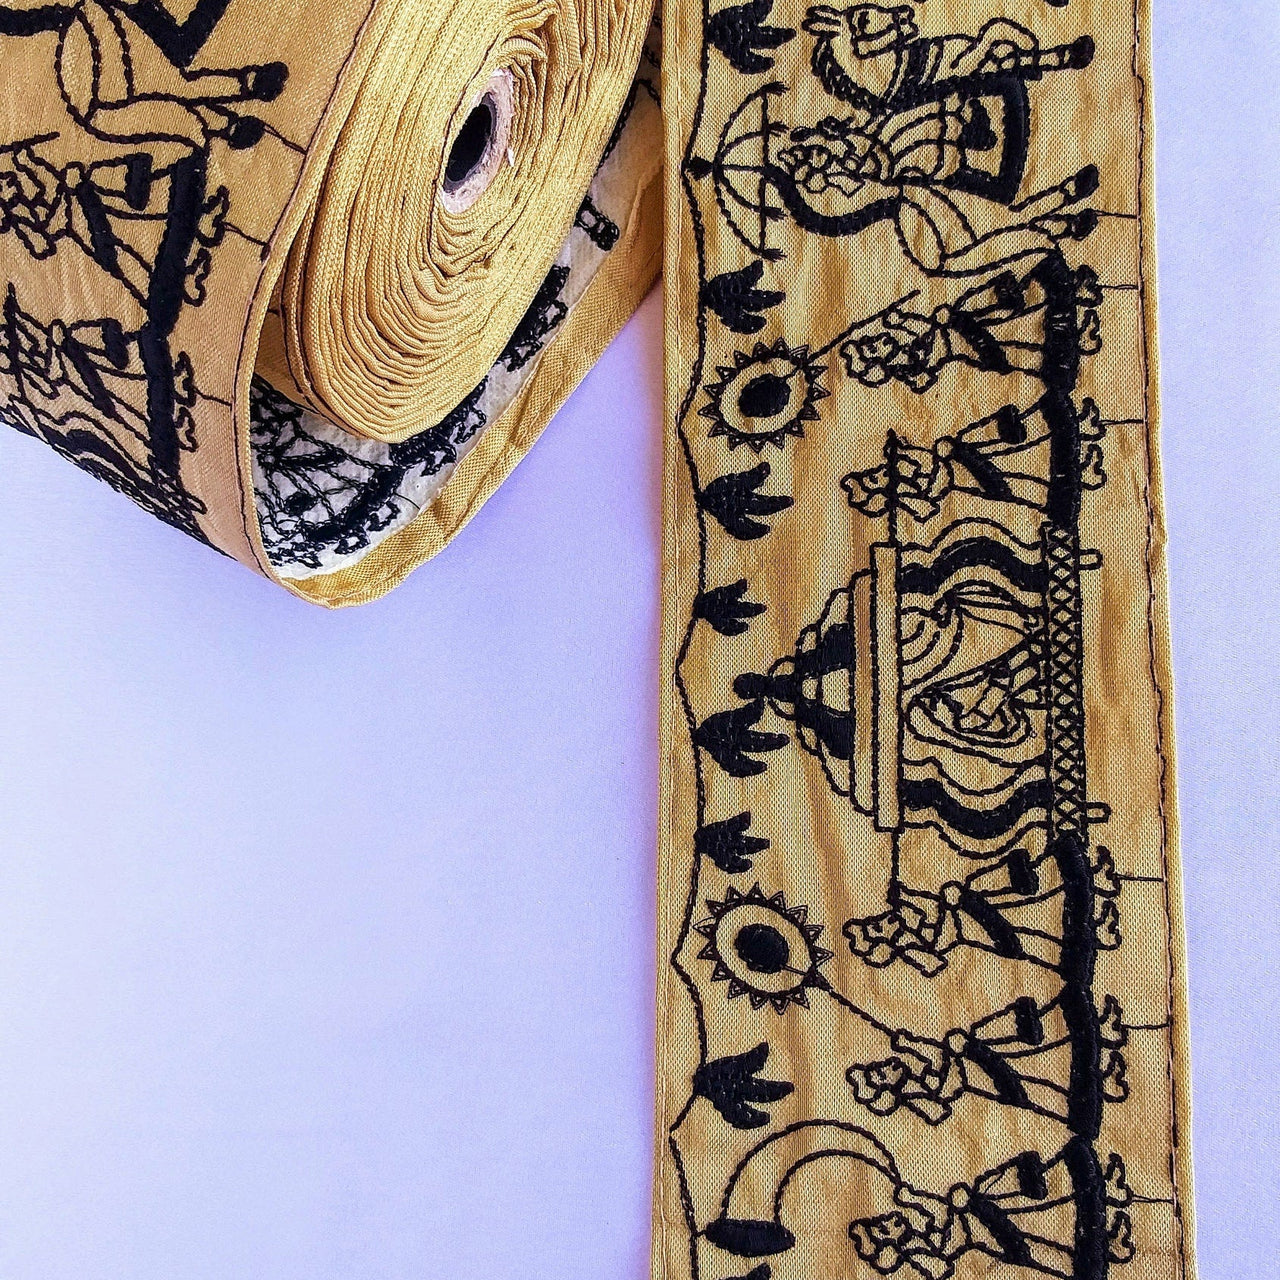 Beige / White Silk Trim With Intricate Black Embroidery Of Indian Bride and Groom, Baraat, Wedding Trim